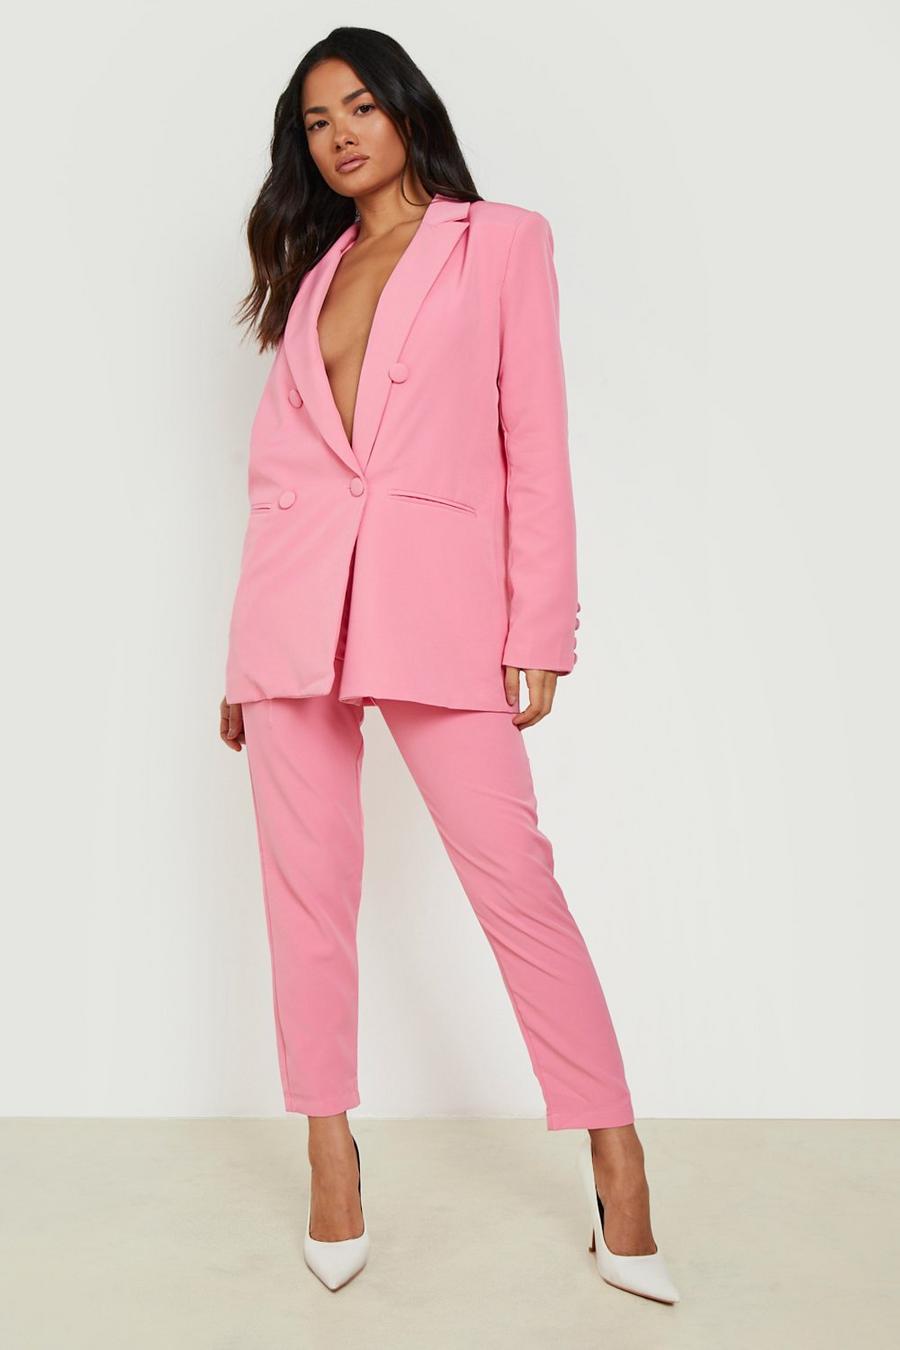 Candy pink Tailored Ankle Grazer Pants